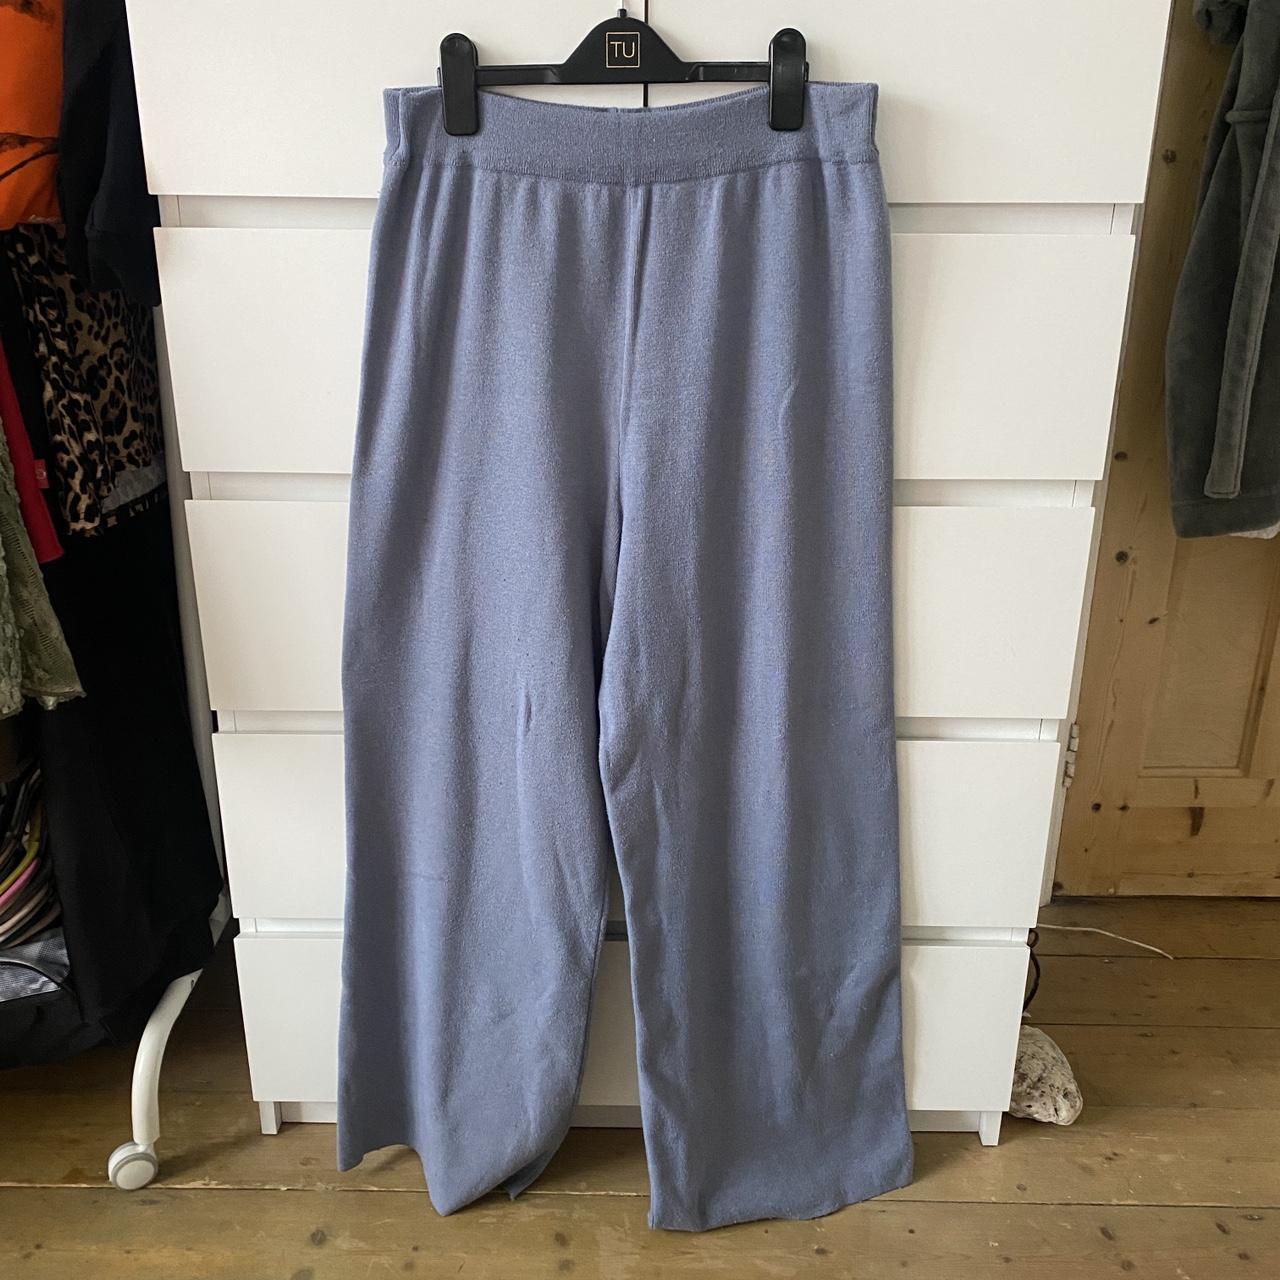 Thick purple trousers Super soft cosy material, - Depop